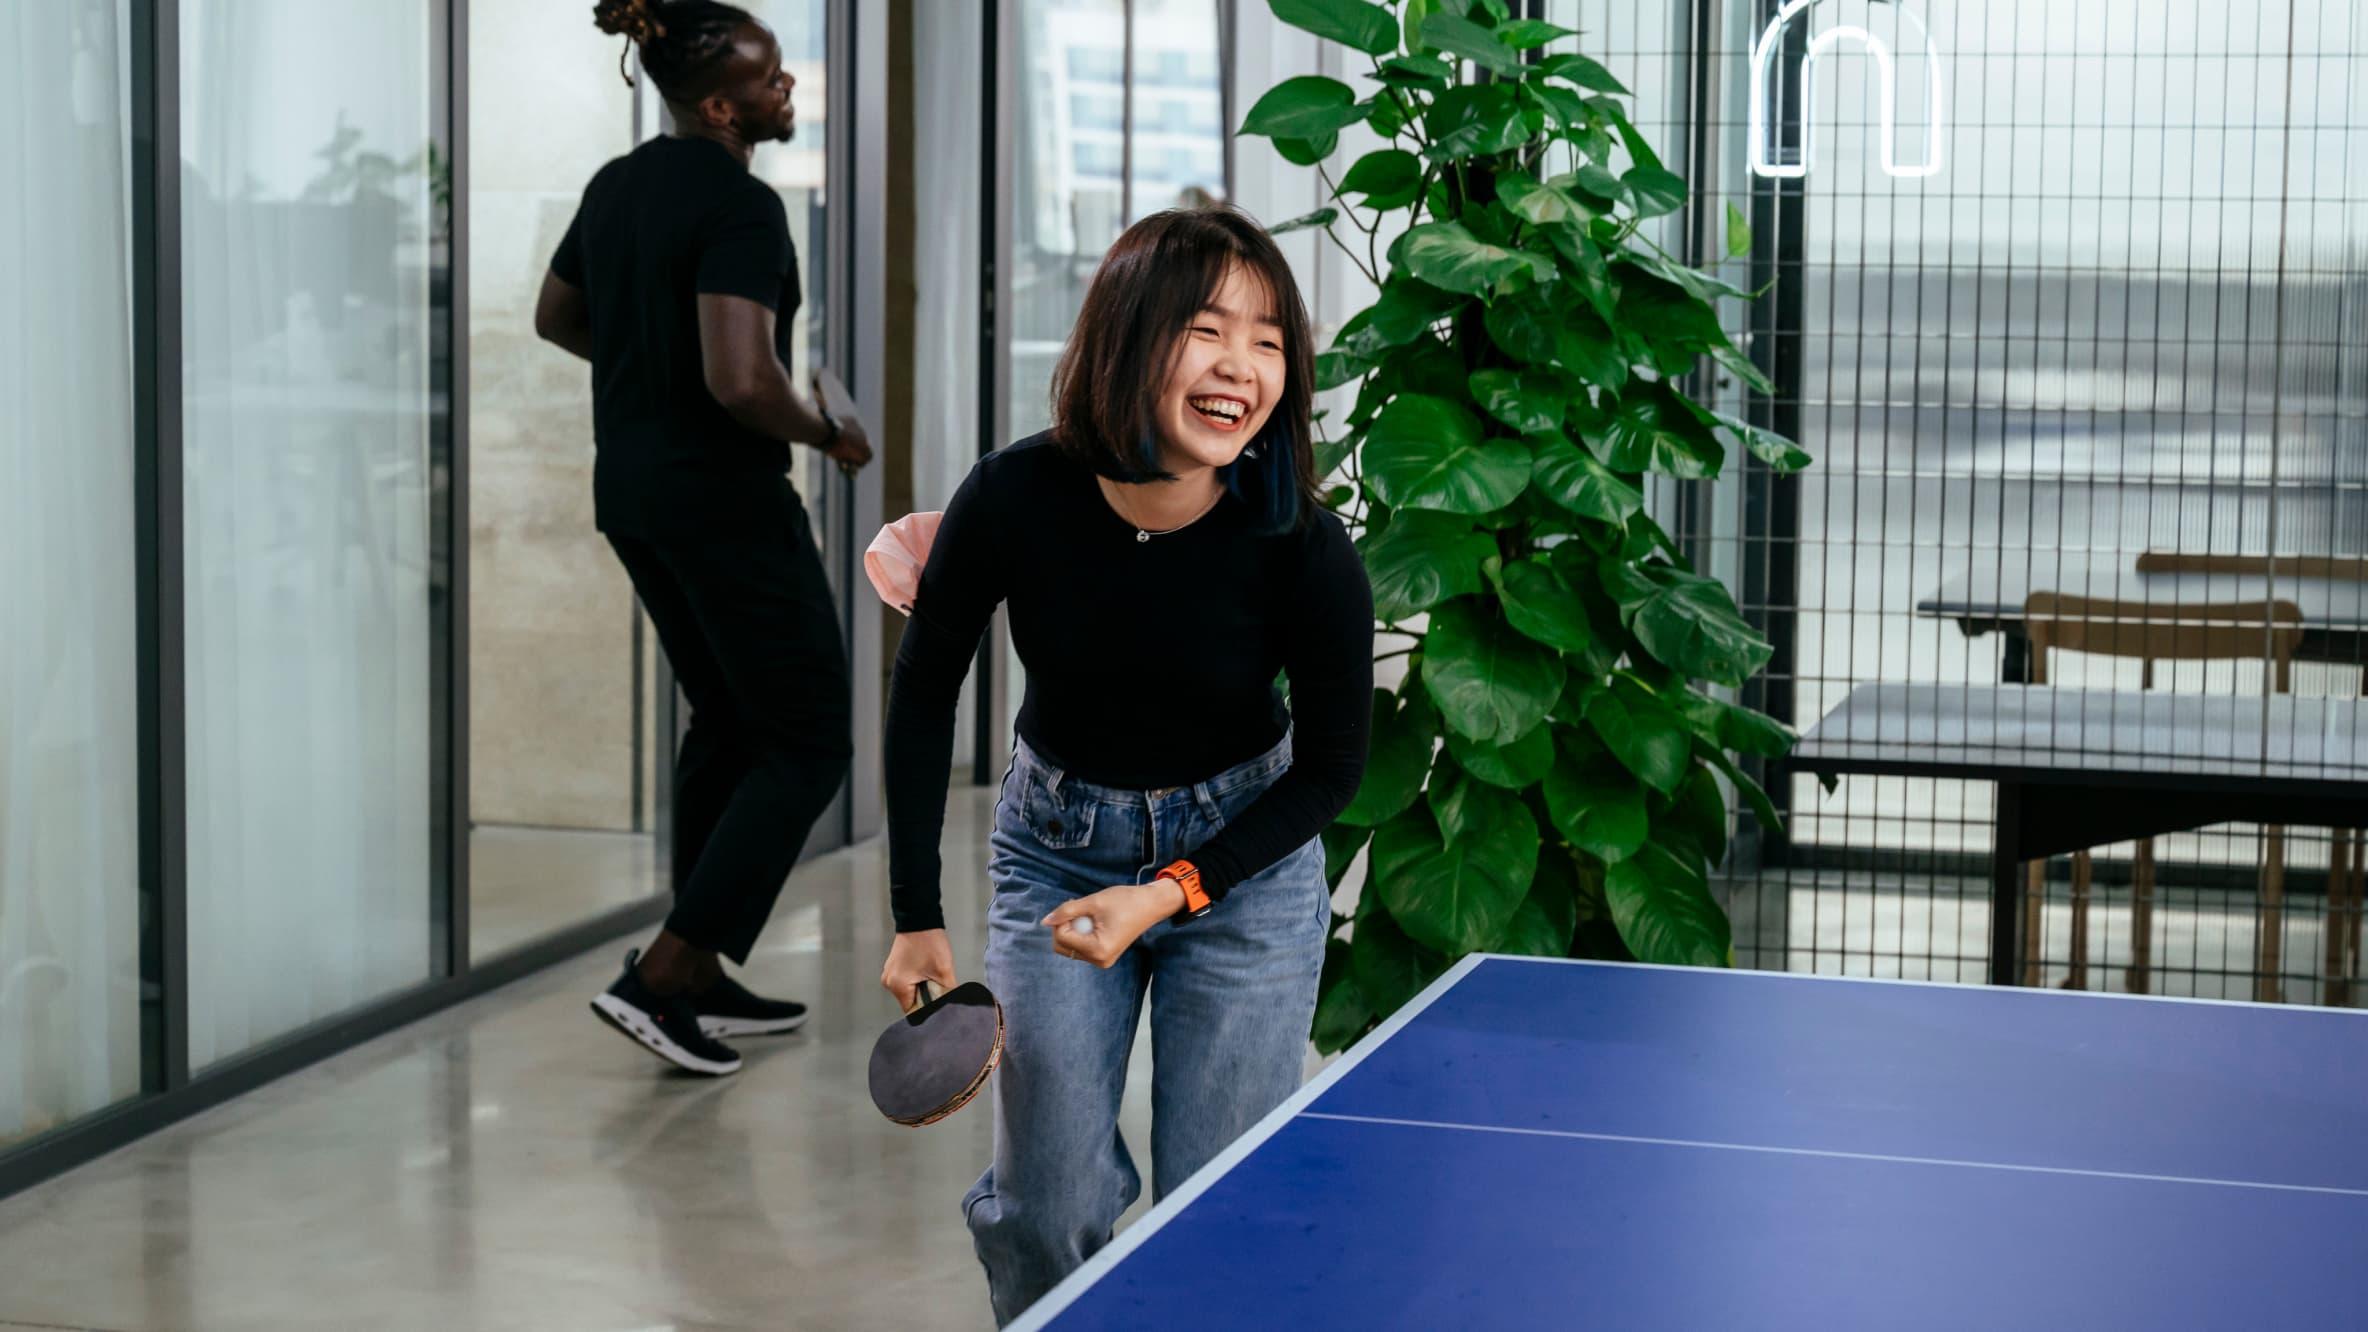 Woman laughing as she plays ping pong in the office!